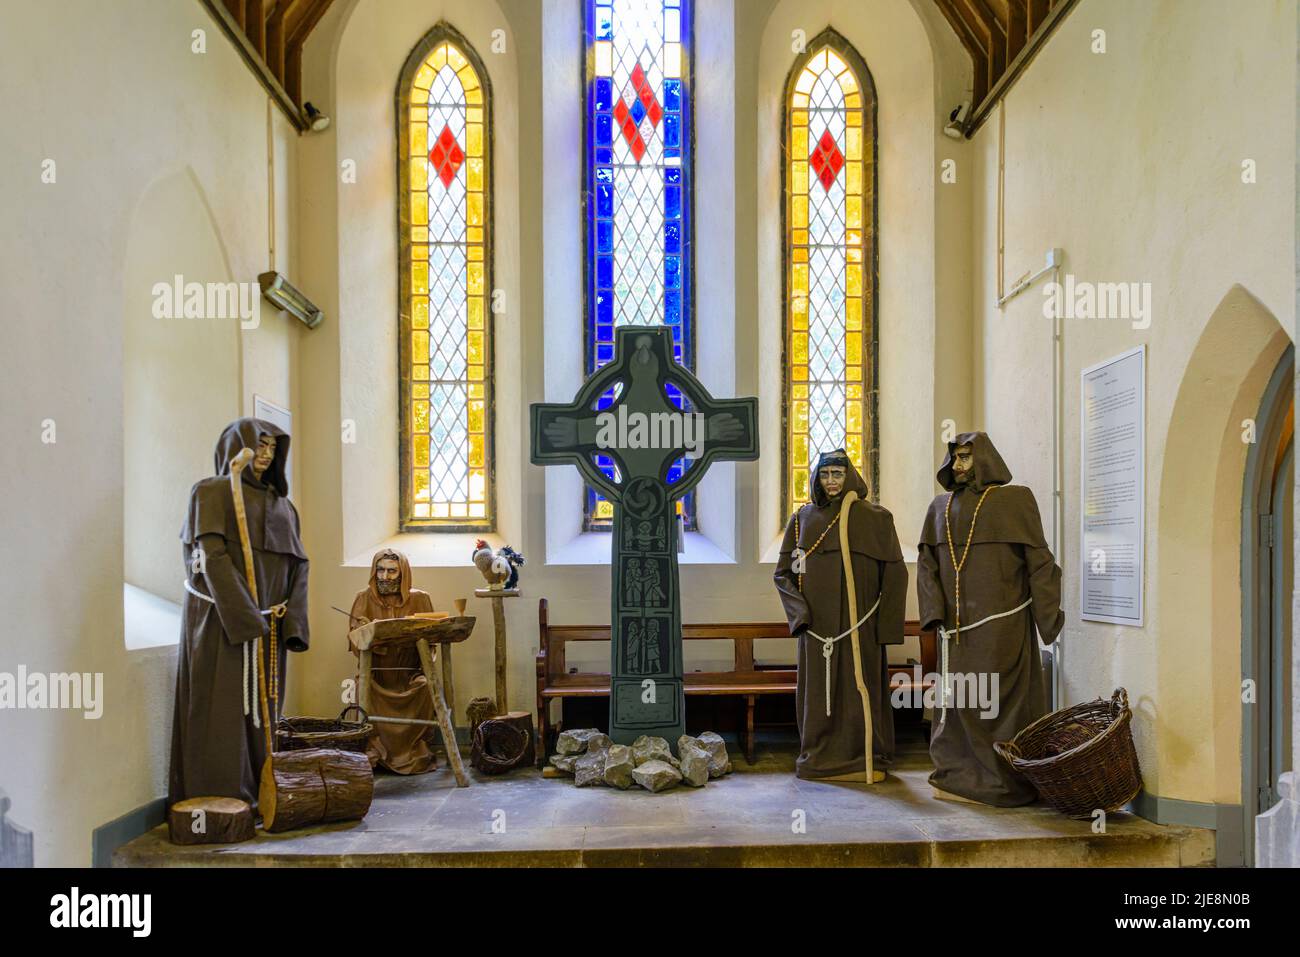 Mannequins dressed as monks around a celtic cross inside a church building. Stock Photo